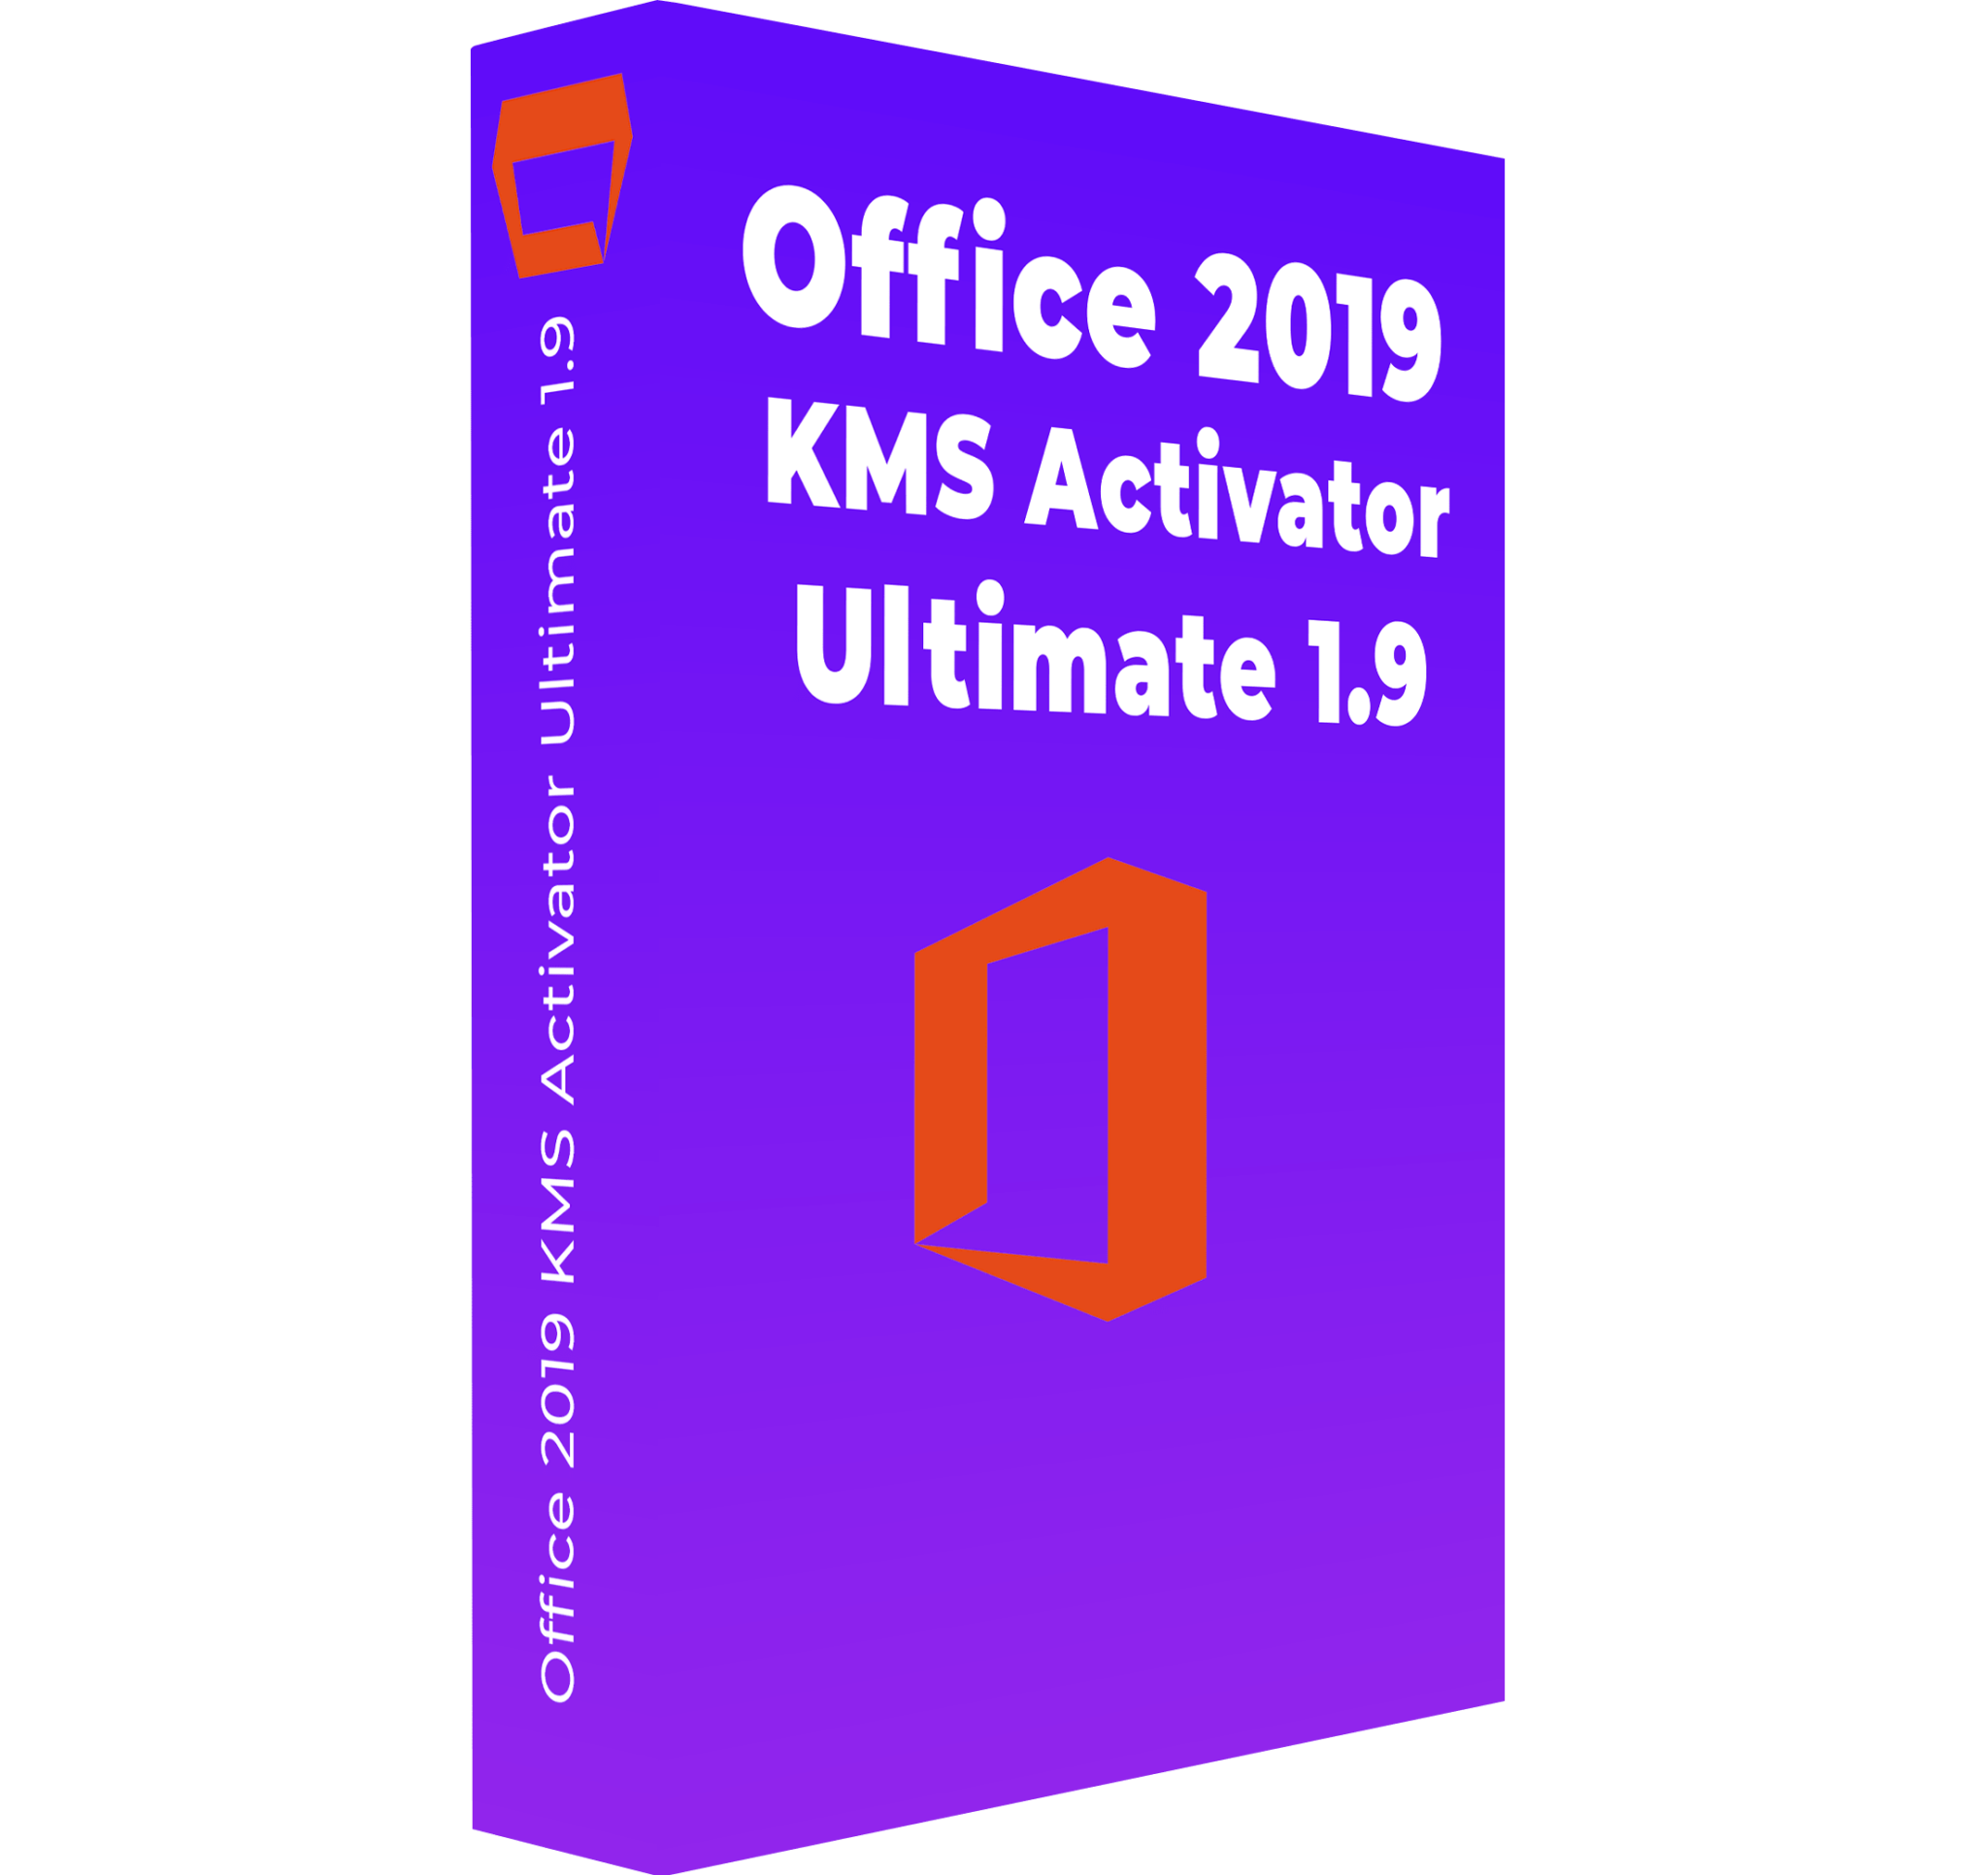 kms office 2016 activator 2017